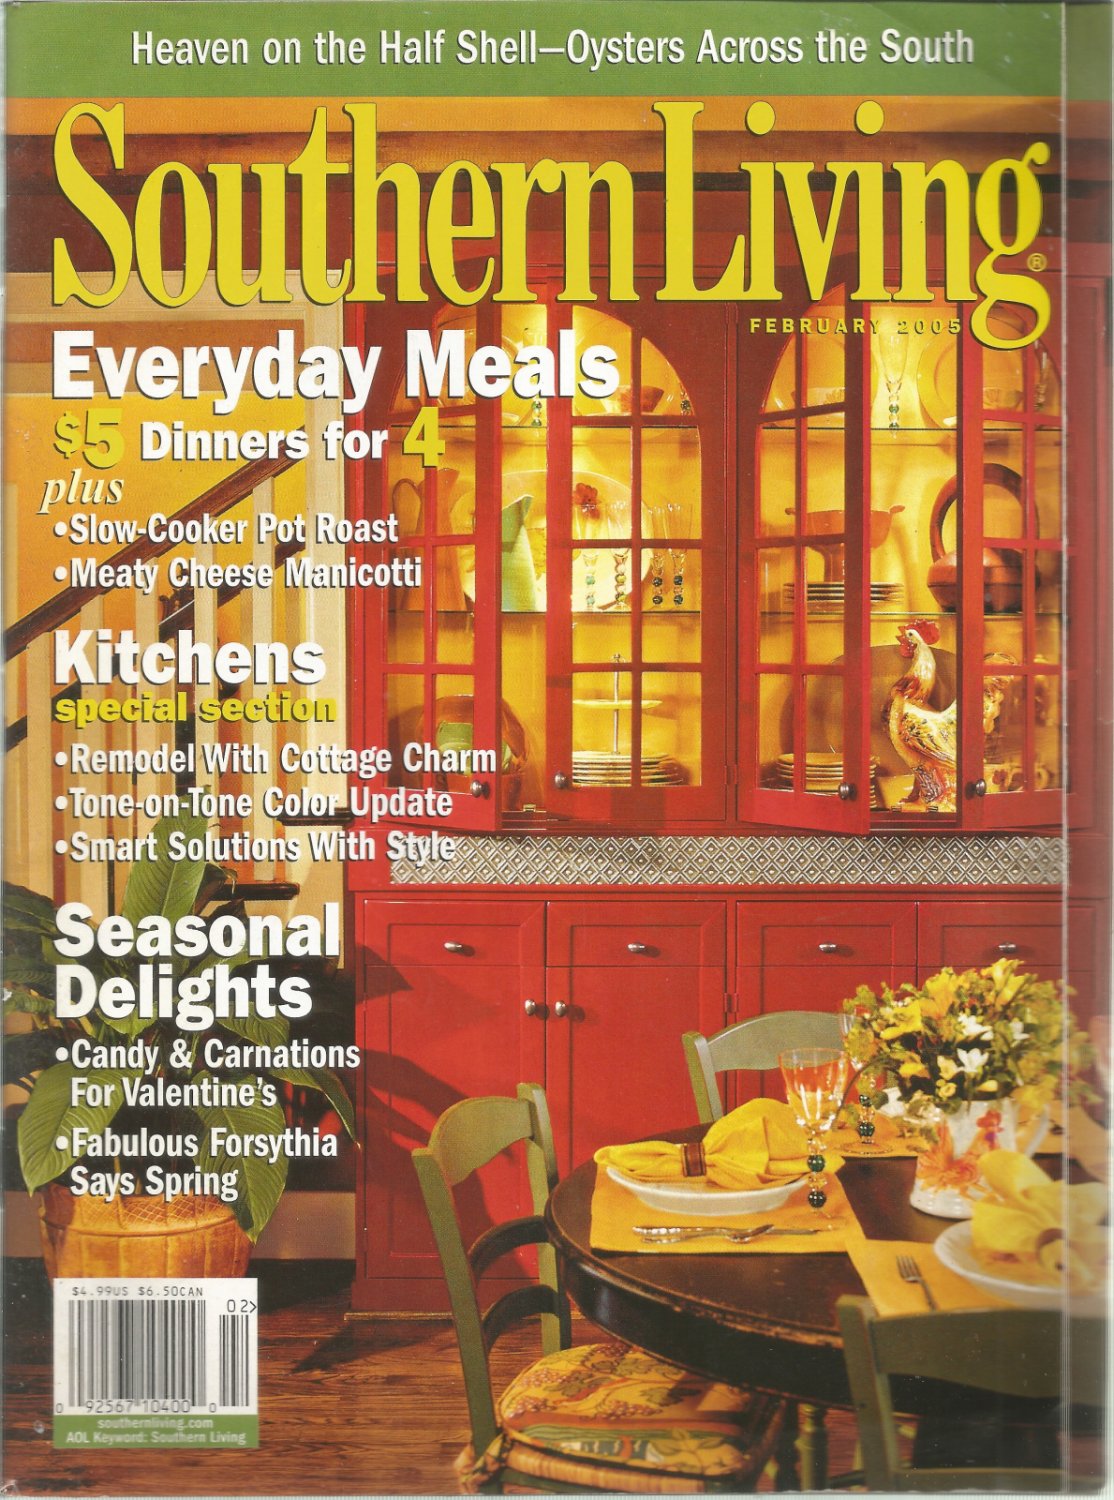 Southern Living magazineFeburary 2005 Remodel with cottage Charm